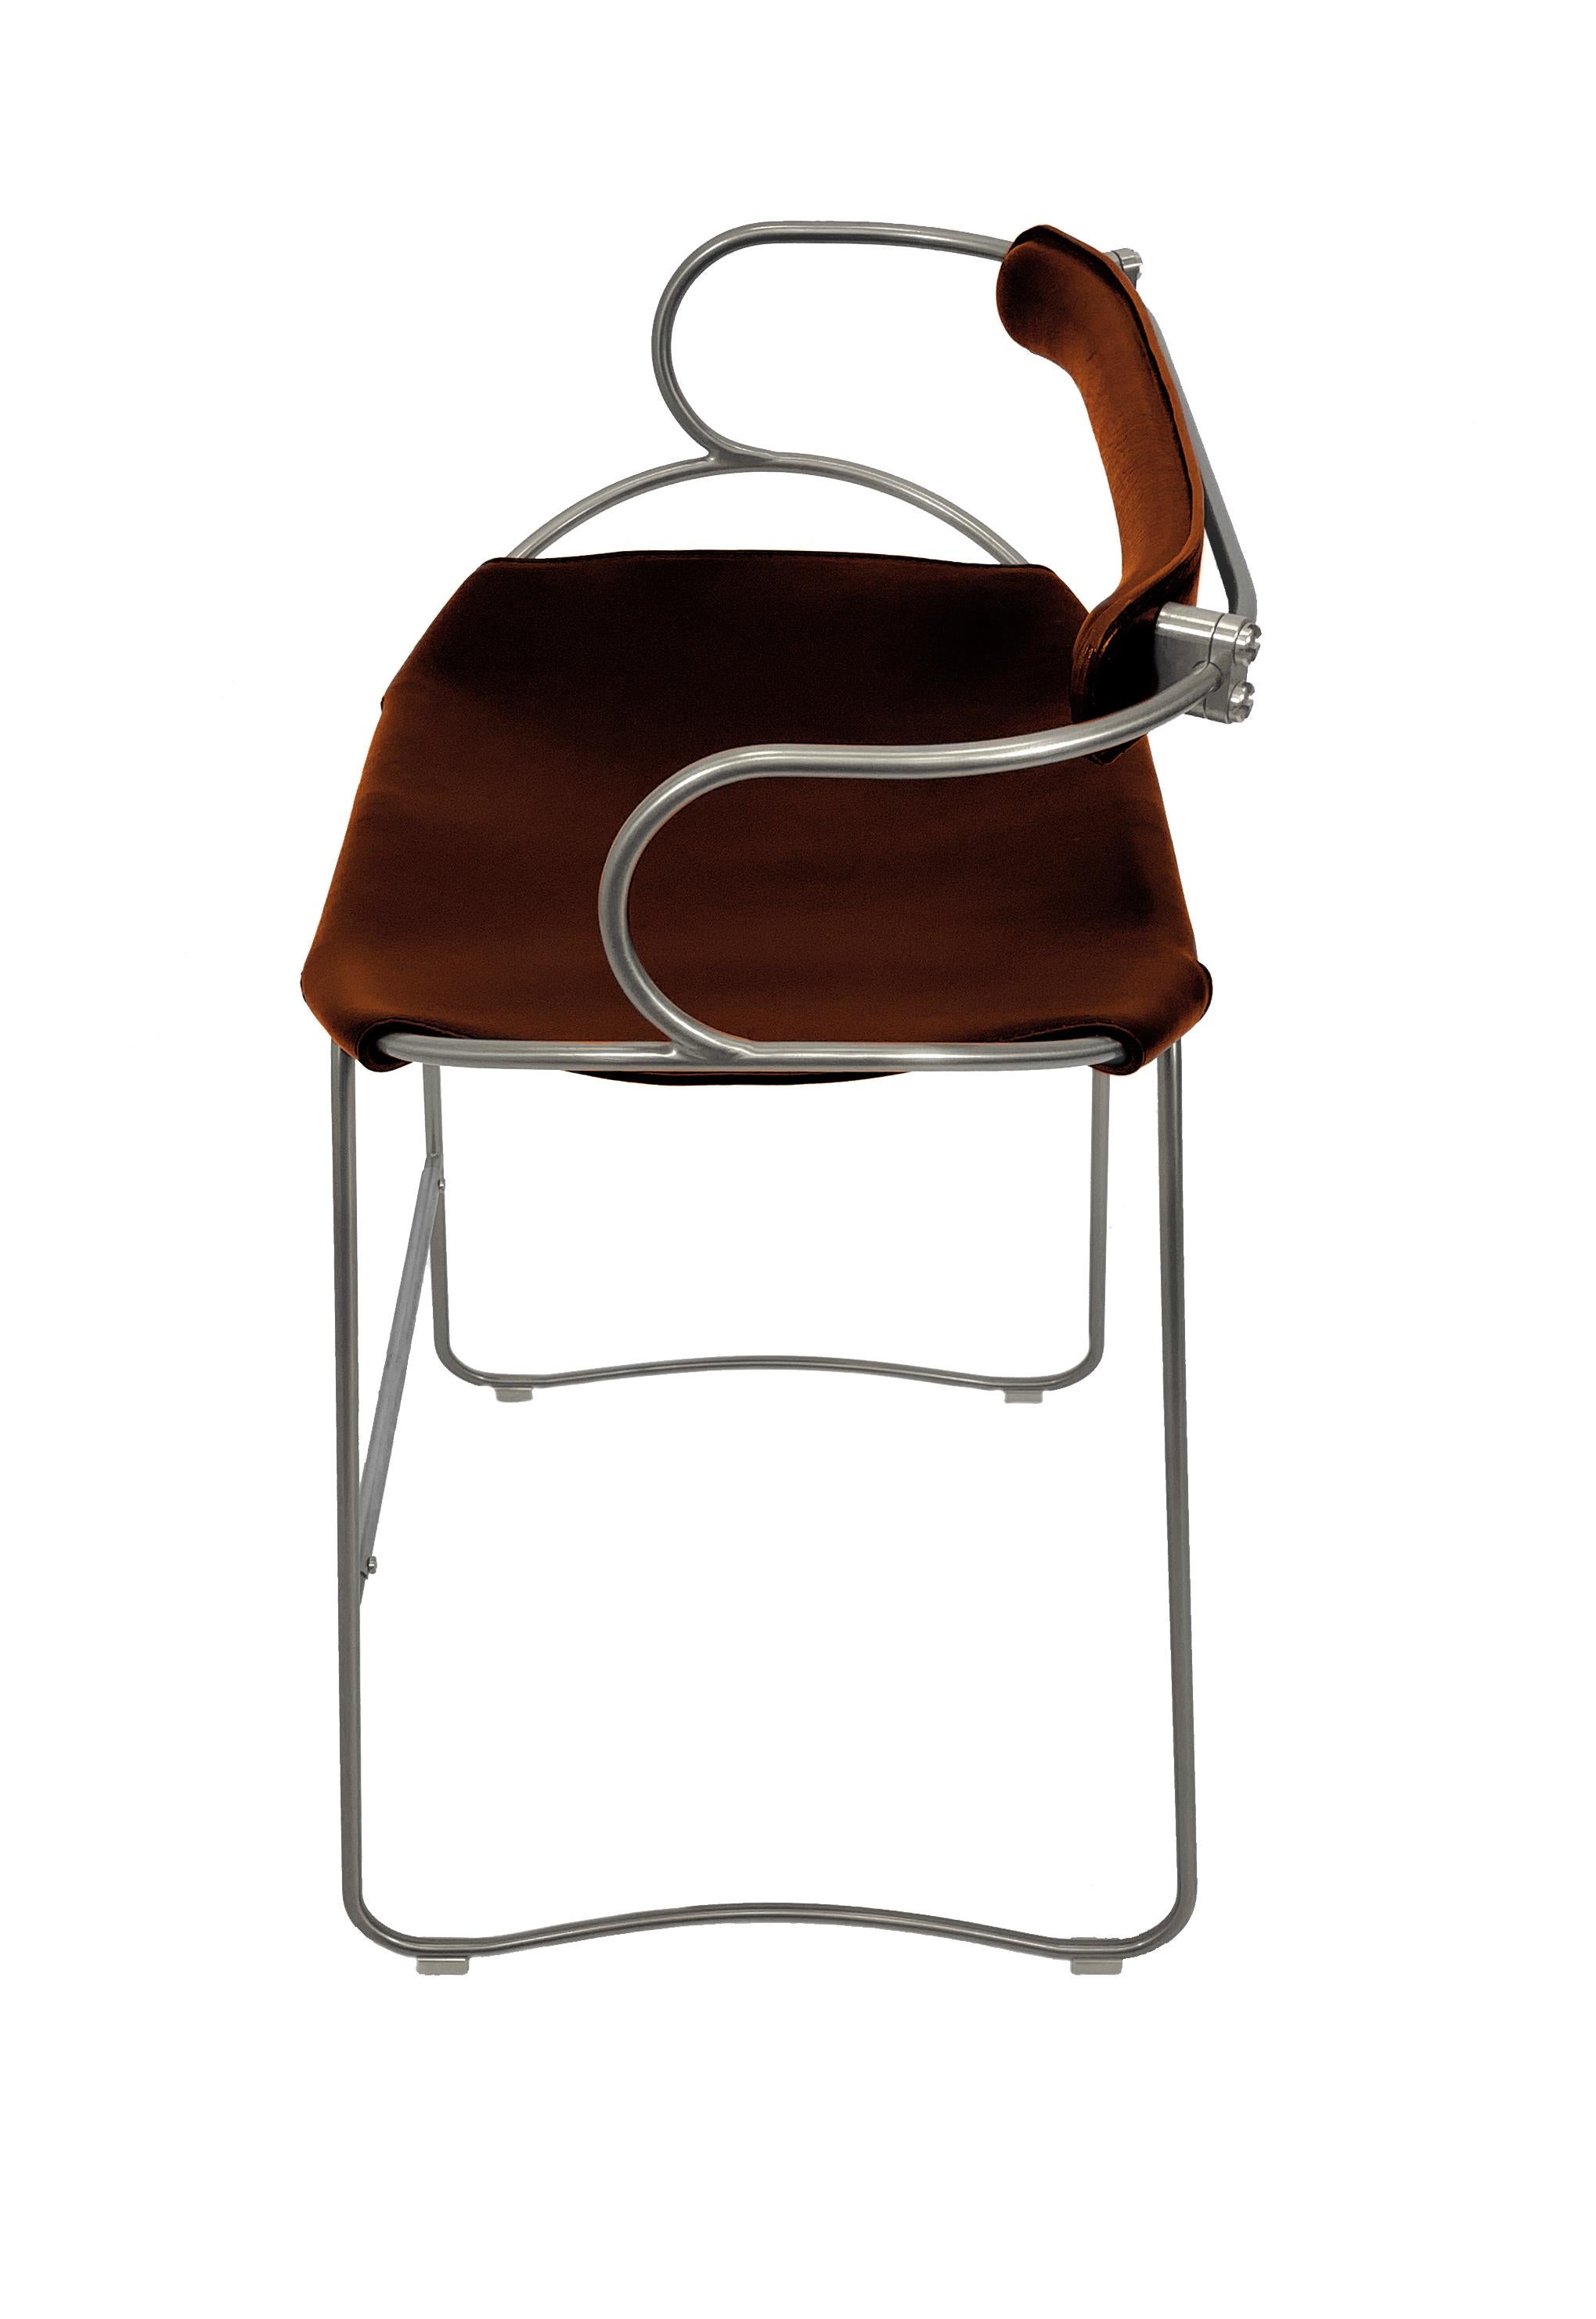 Spanish Contemporary Sculptural Bar Stool w. Backrest Old Silver Steel & Cognac Leather For Sale